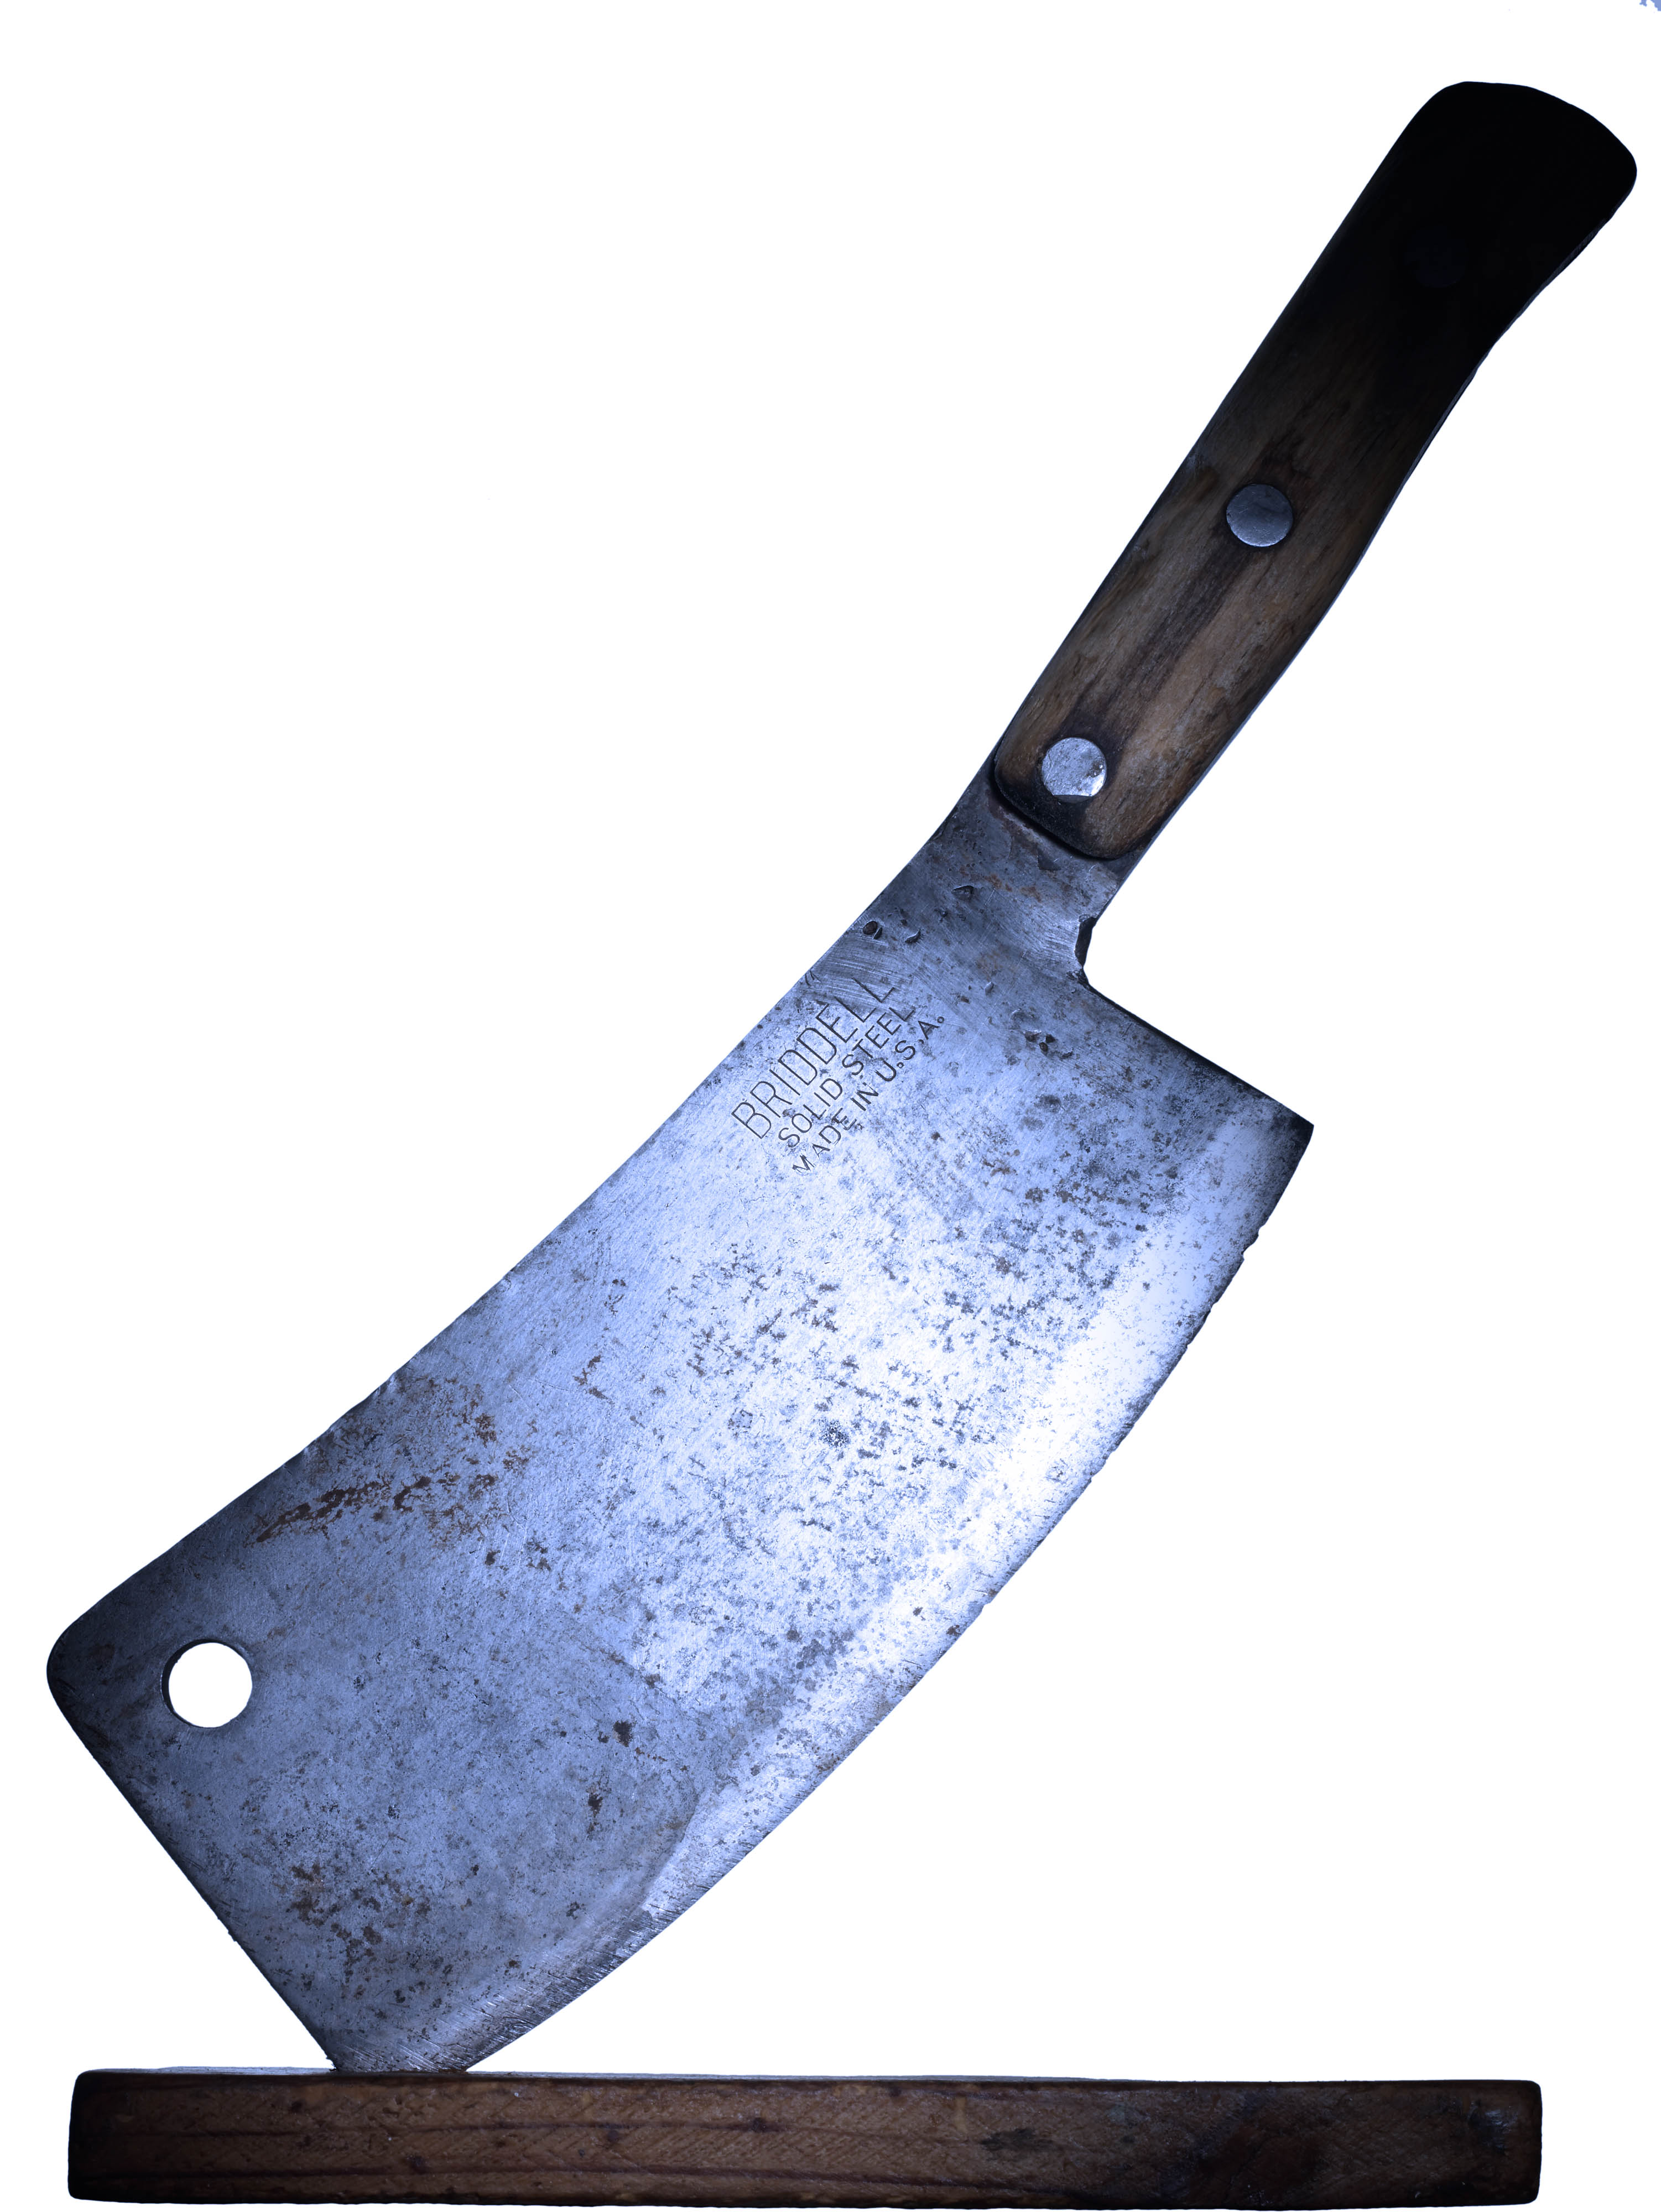 meatcleaver